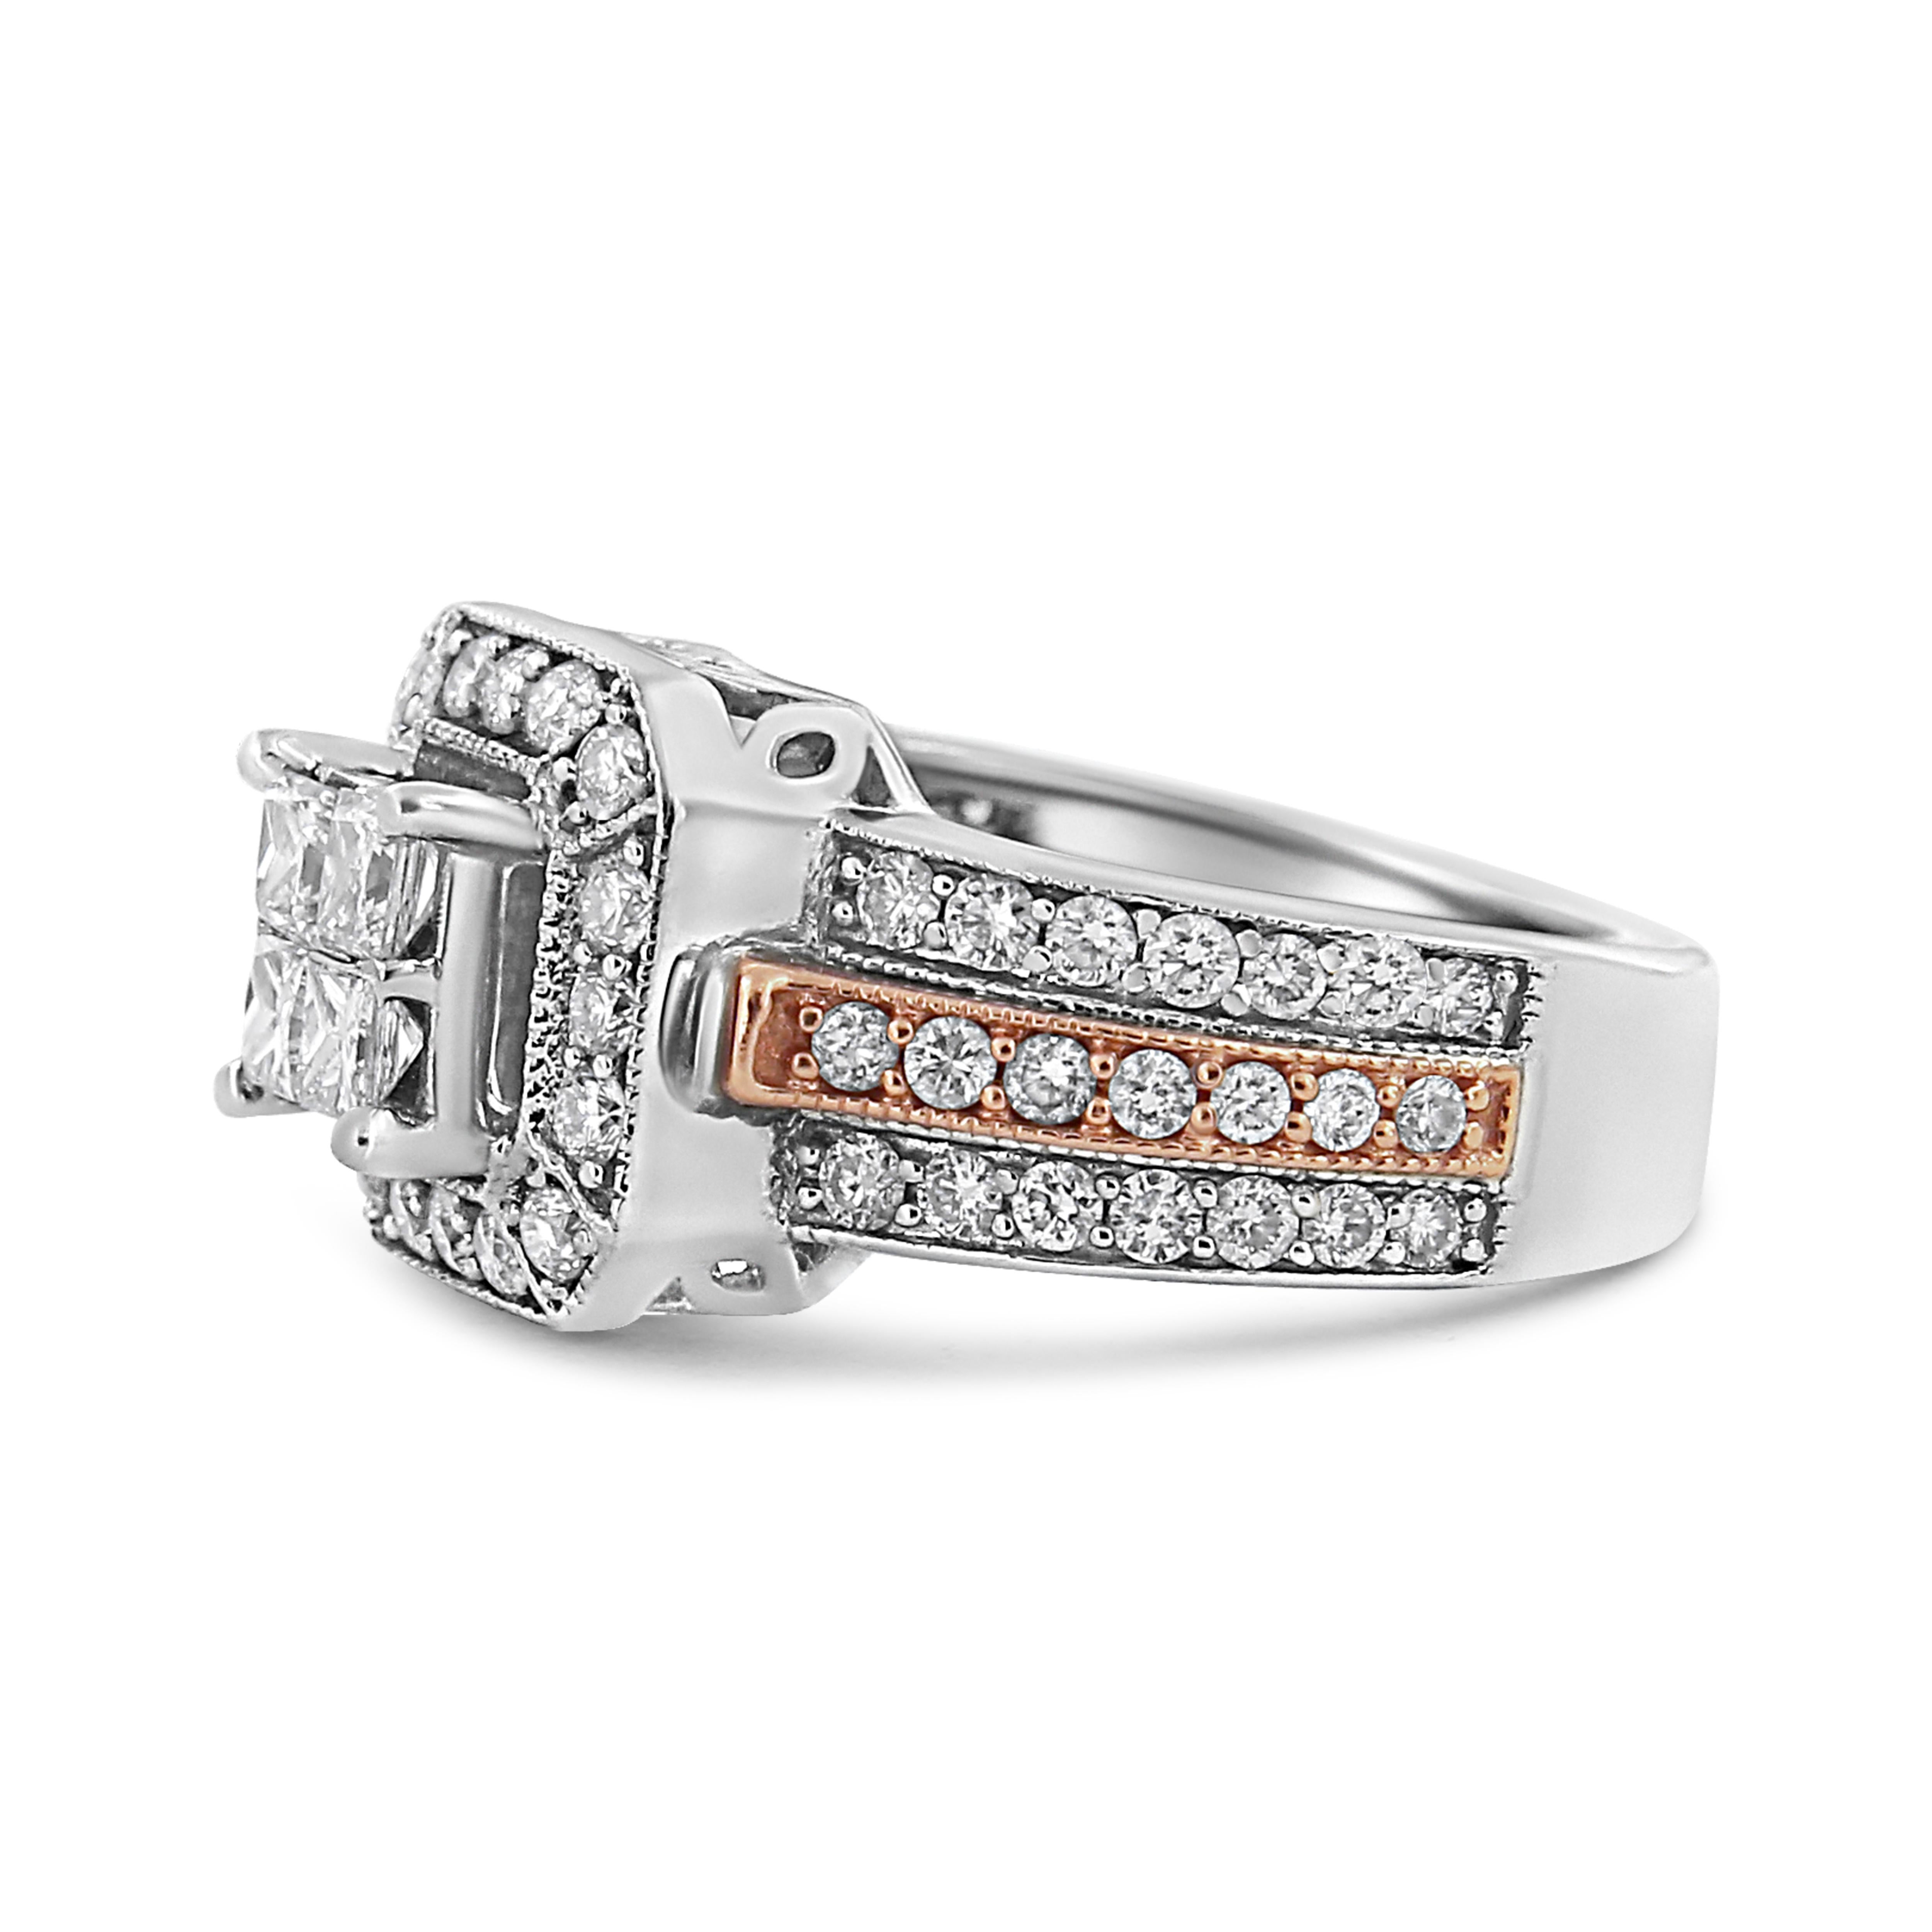 For Sale:  14K White and Rose Gold 1 1/8 Carat Diamond Triple Shank Halo Cocktail Ring 3